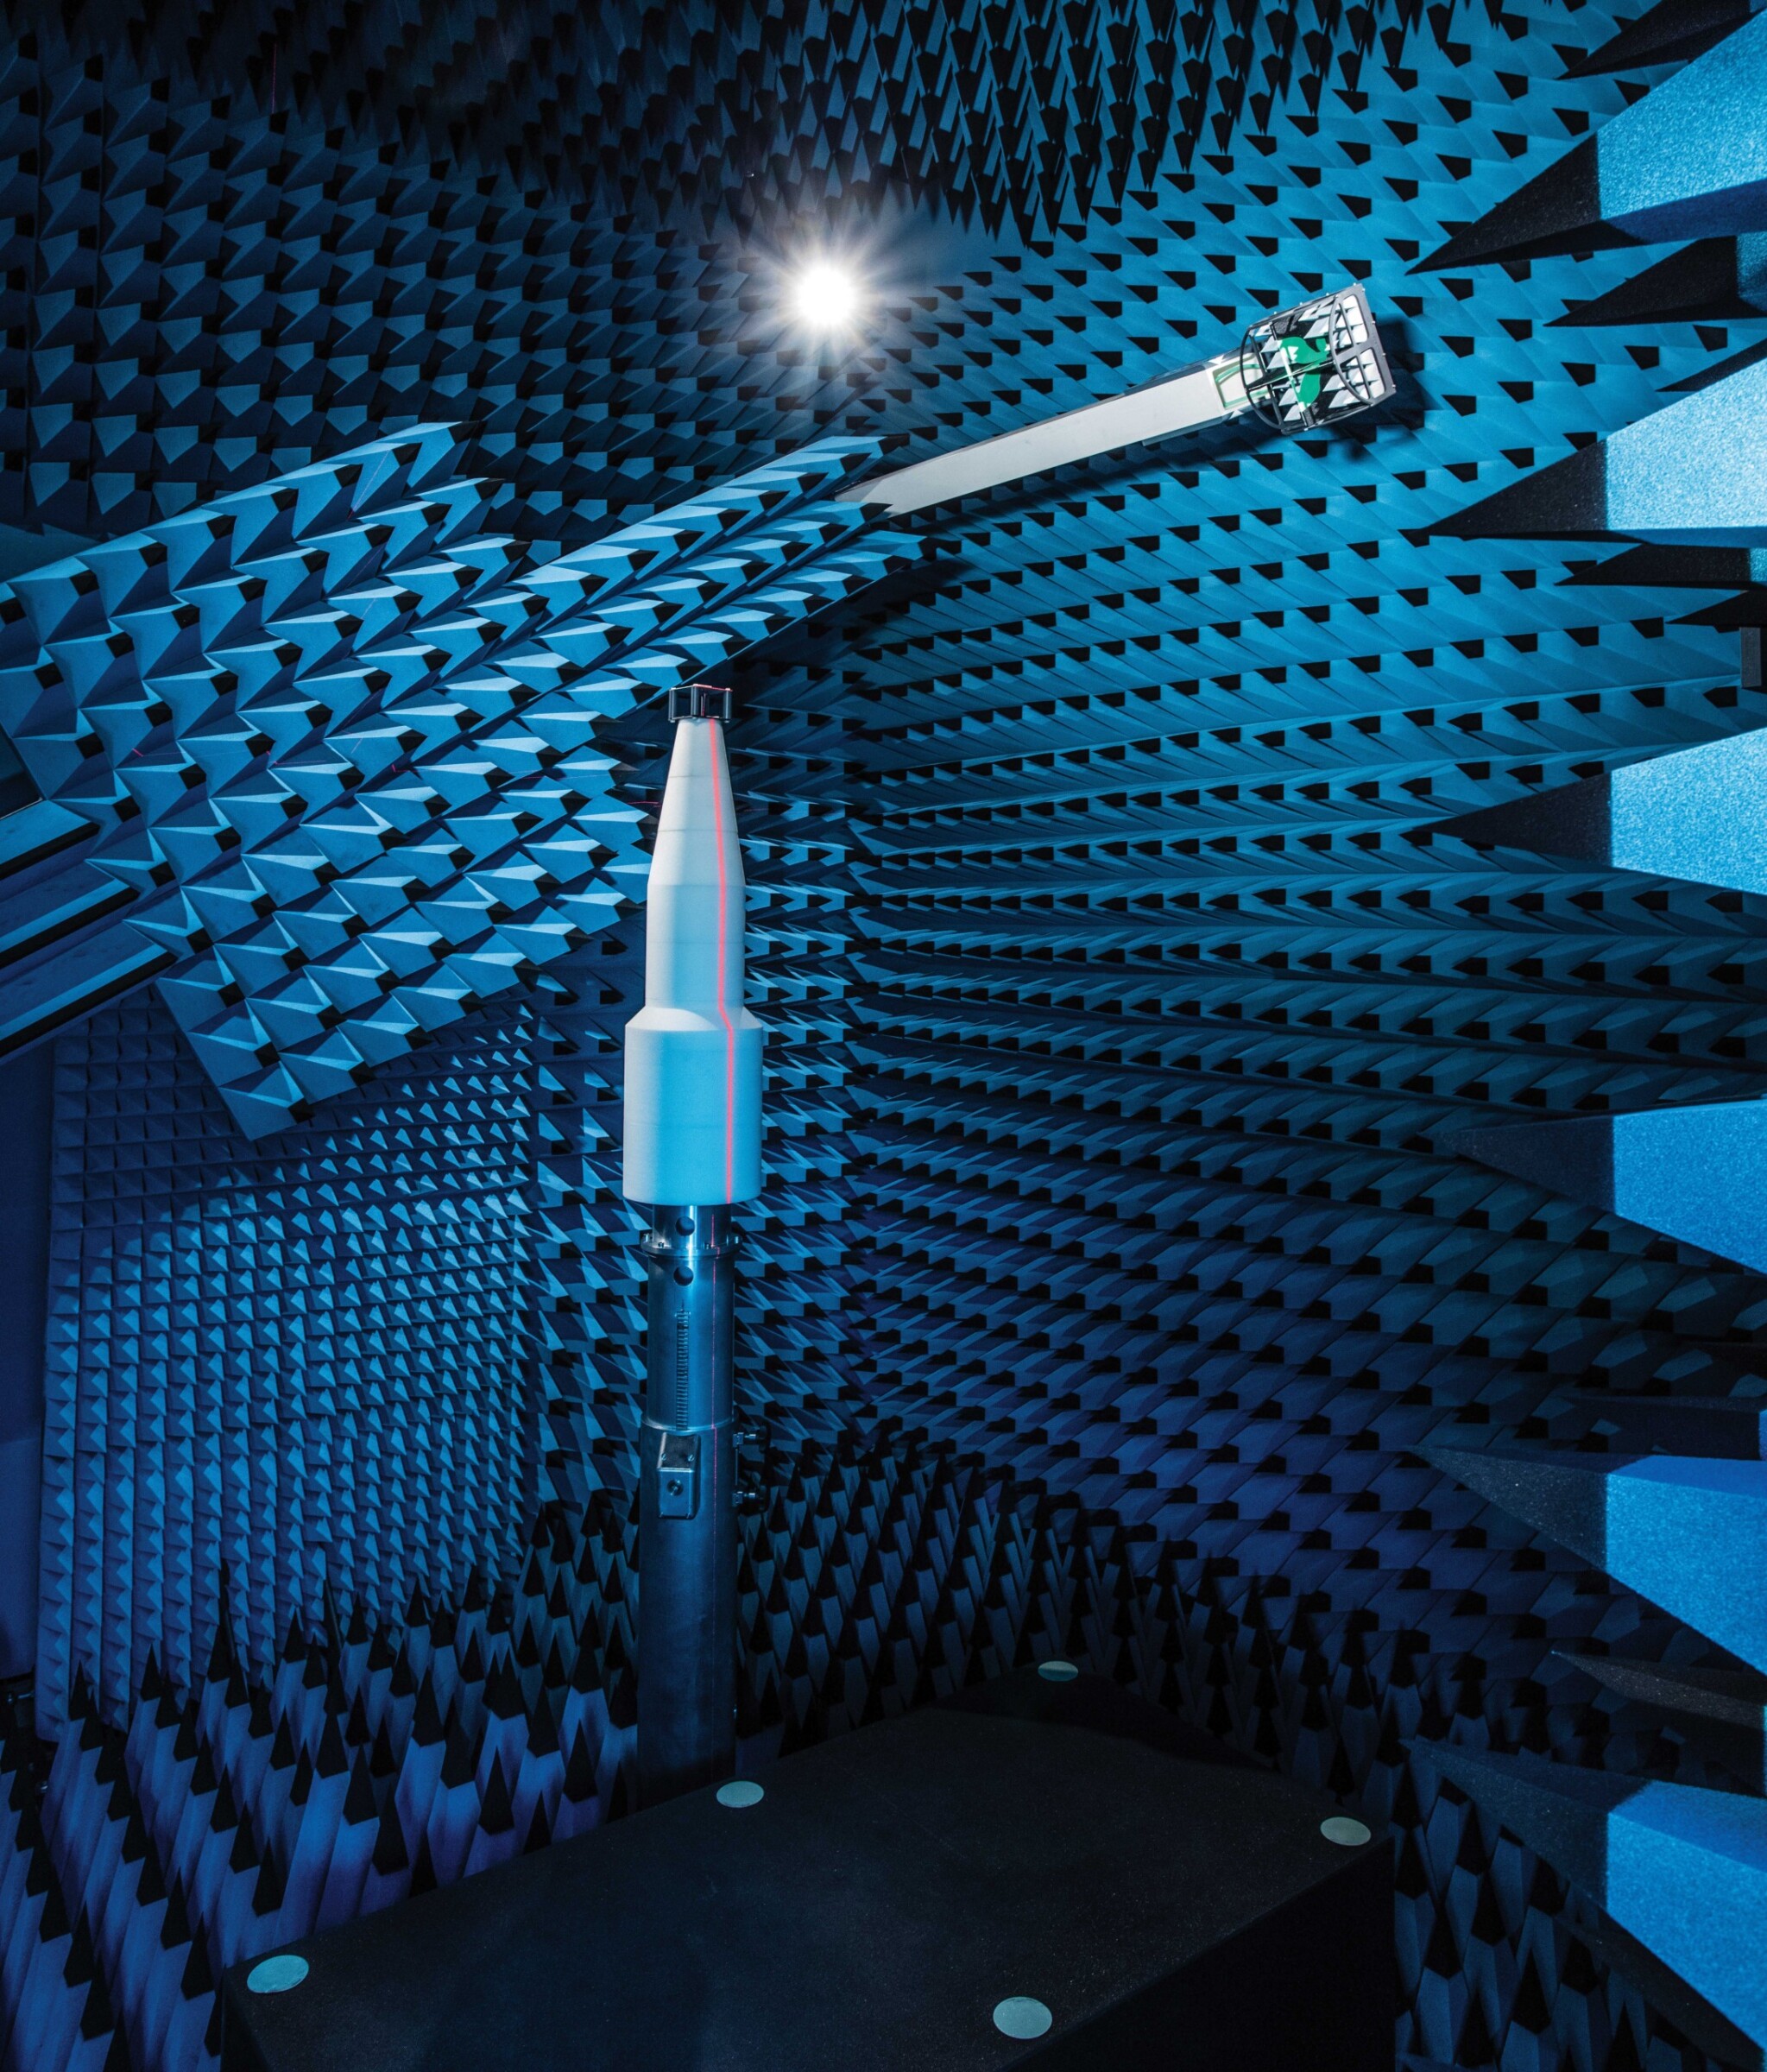 At Rohde & Schwarz, both large, wide-reach and small antennas are measured and tested in chambers such as these. The picture shows a small black specimen on a conical, white support.